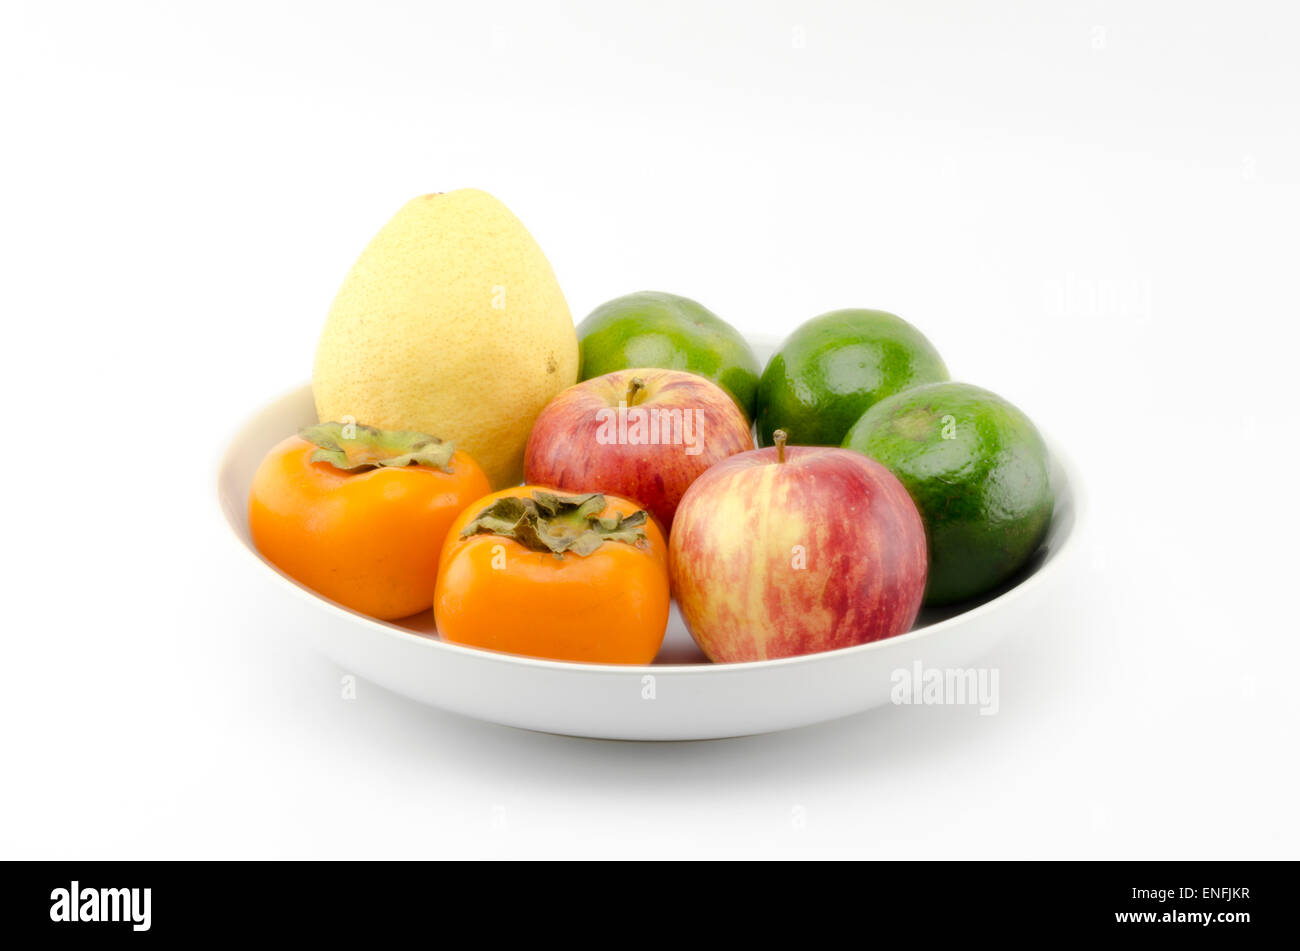 chinese pear apple green orange and persimon on white dish isolated on white background Stock Photo